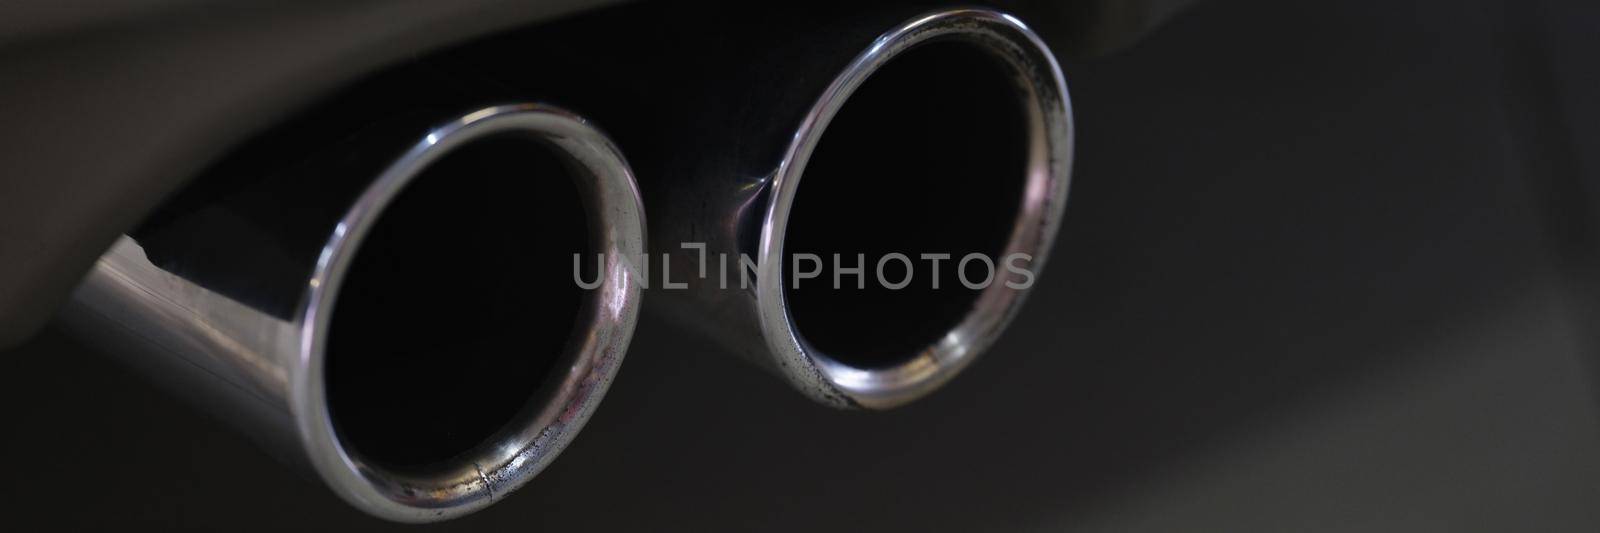 Twin chrome tailpipe of powerful sports car with black body and gray plastic parts by kuprevich